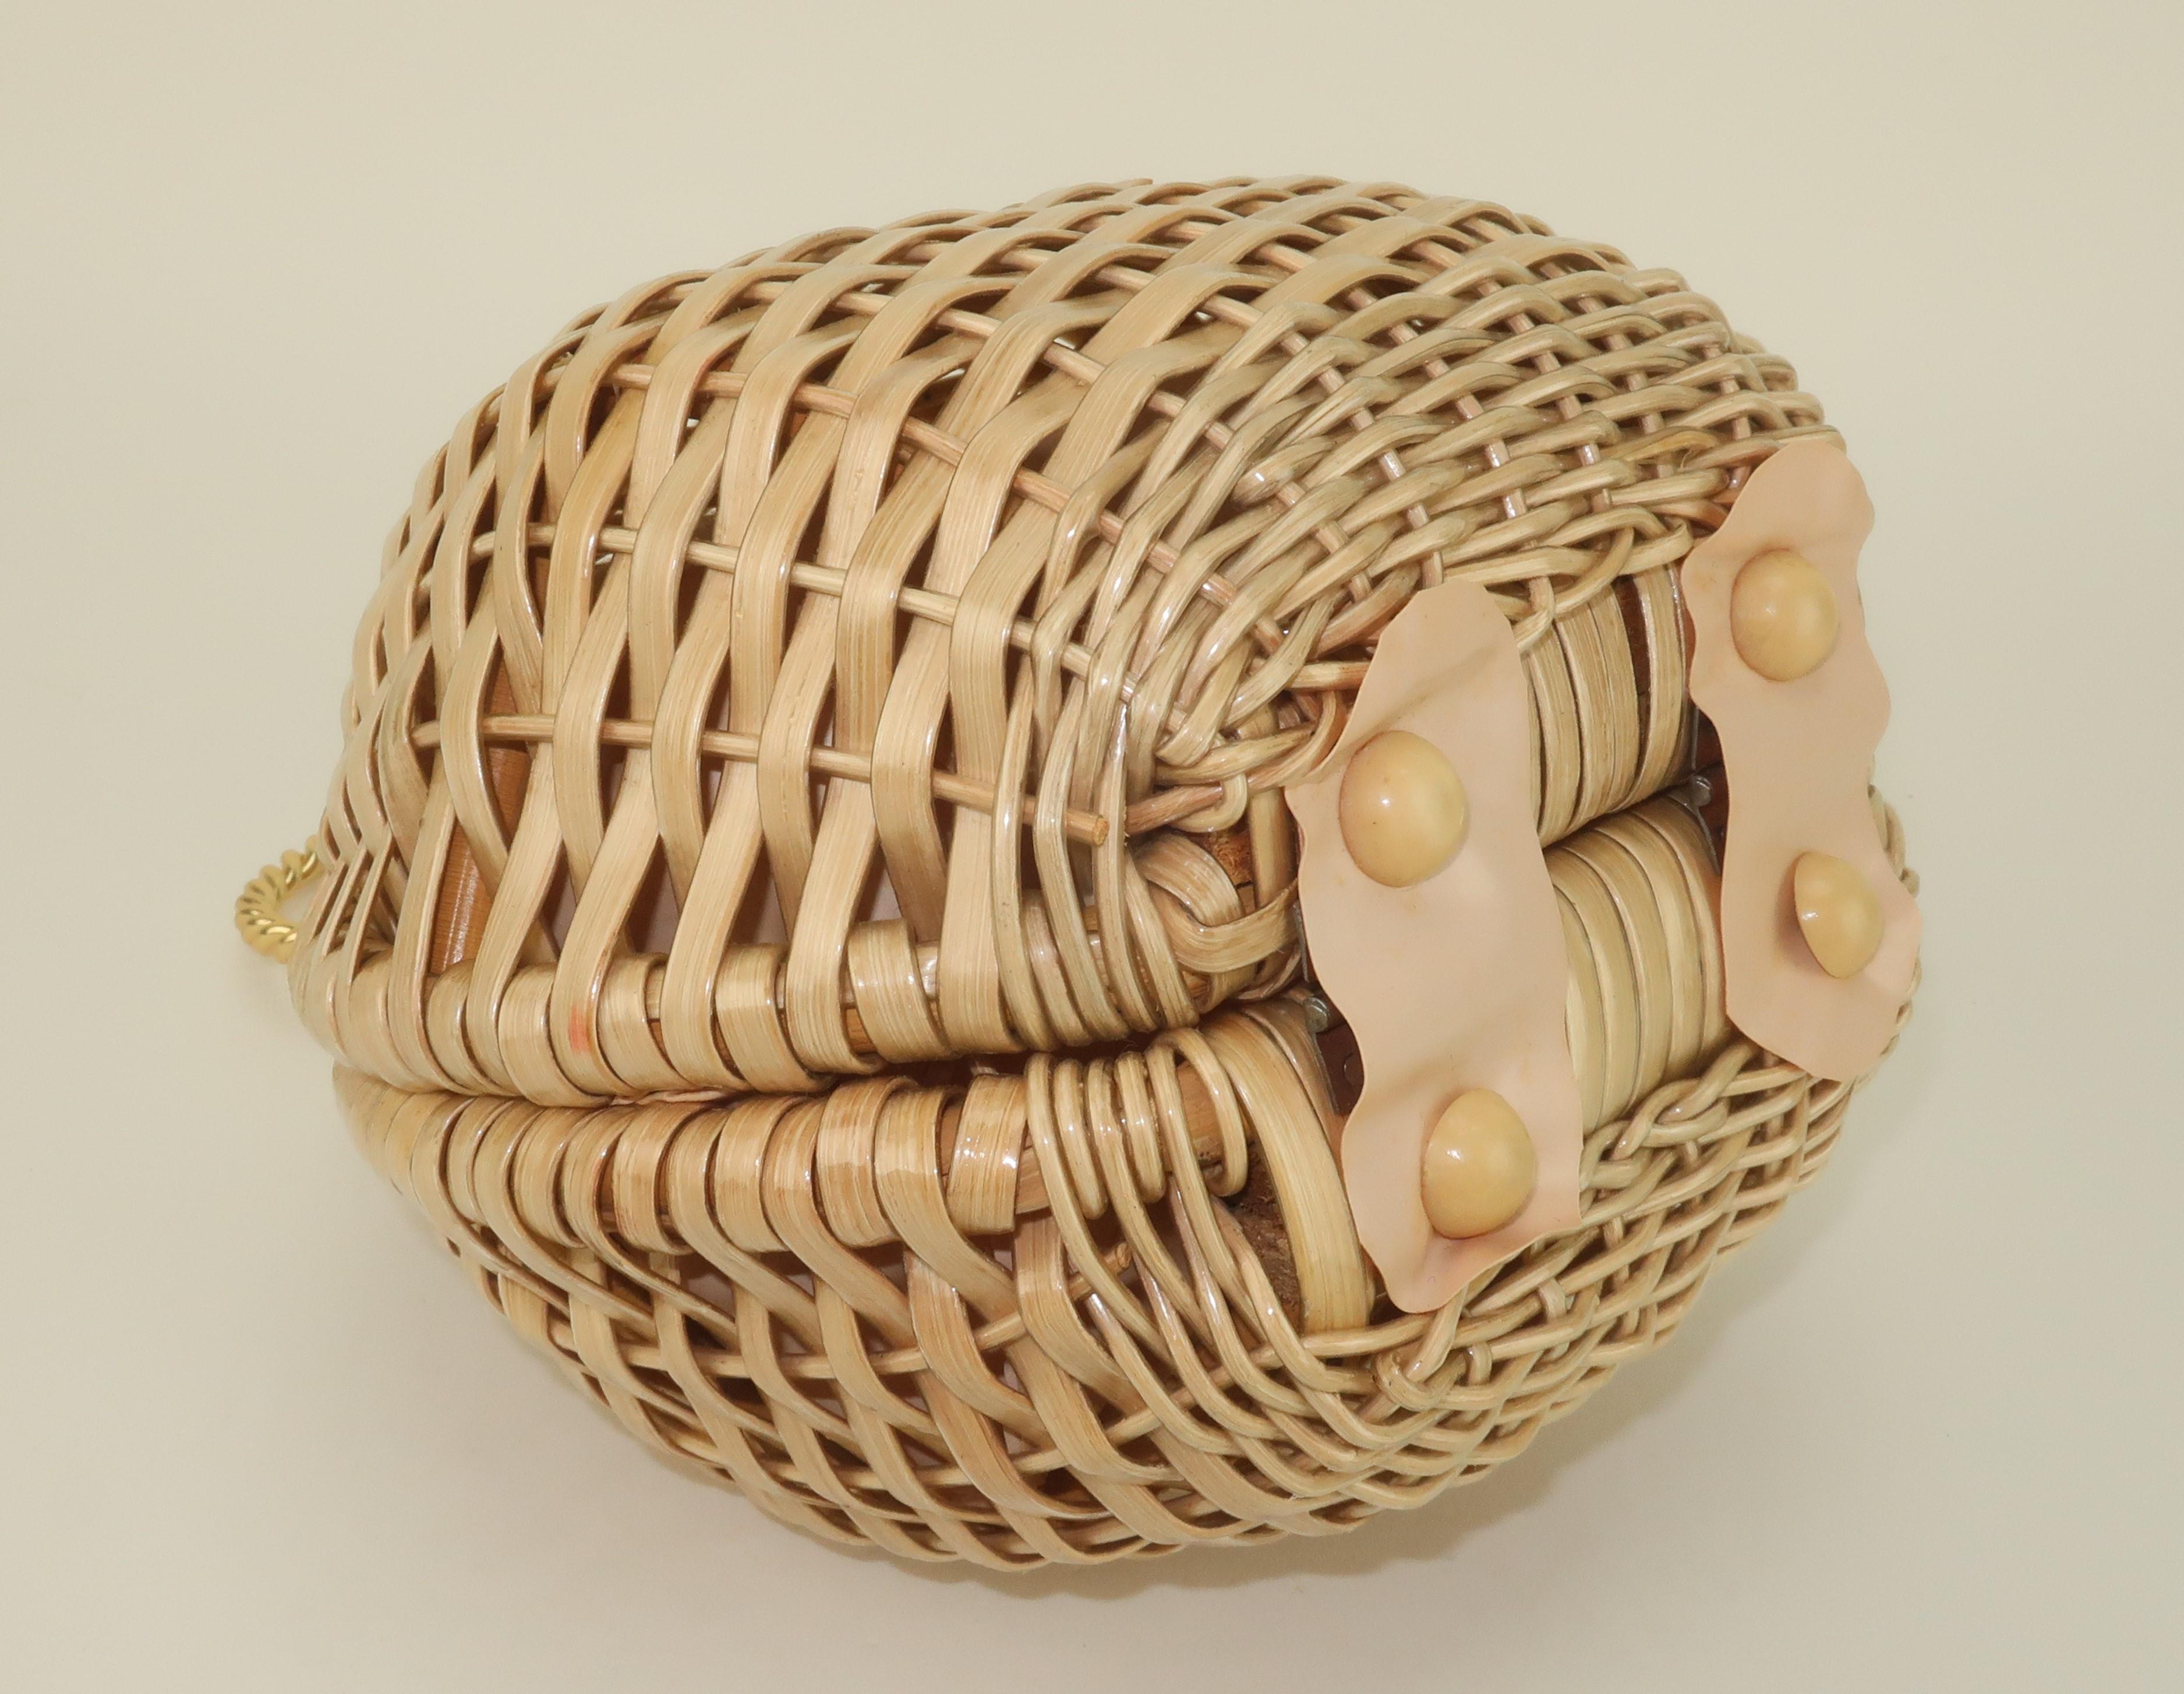 Wicker Ball Shaped Handbag With Gold Handle, 1960's For Sale 4